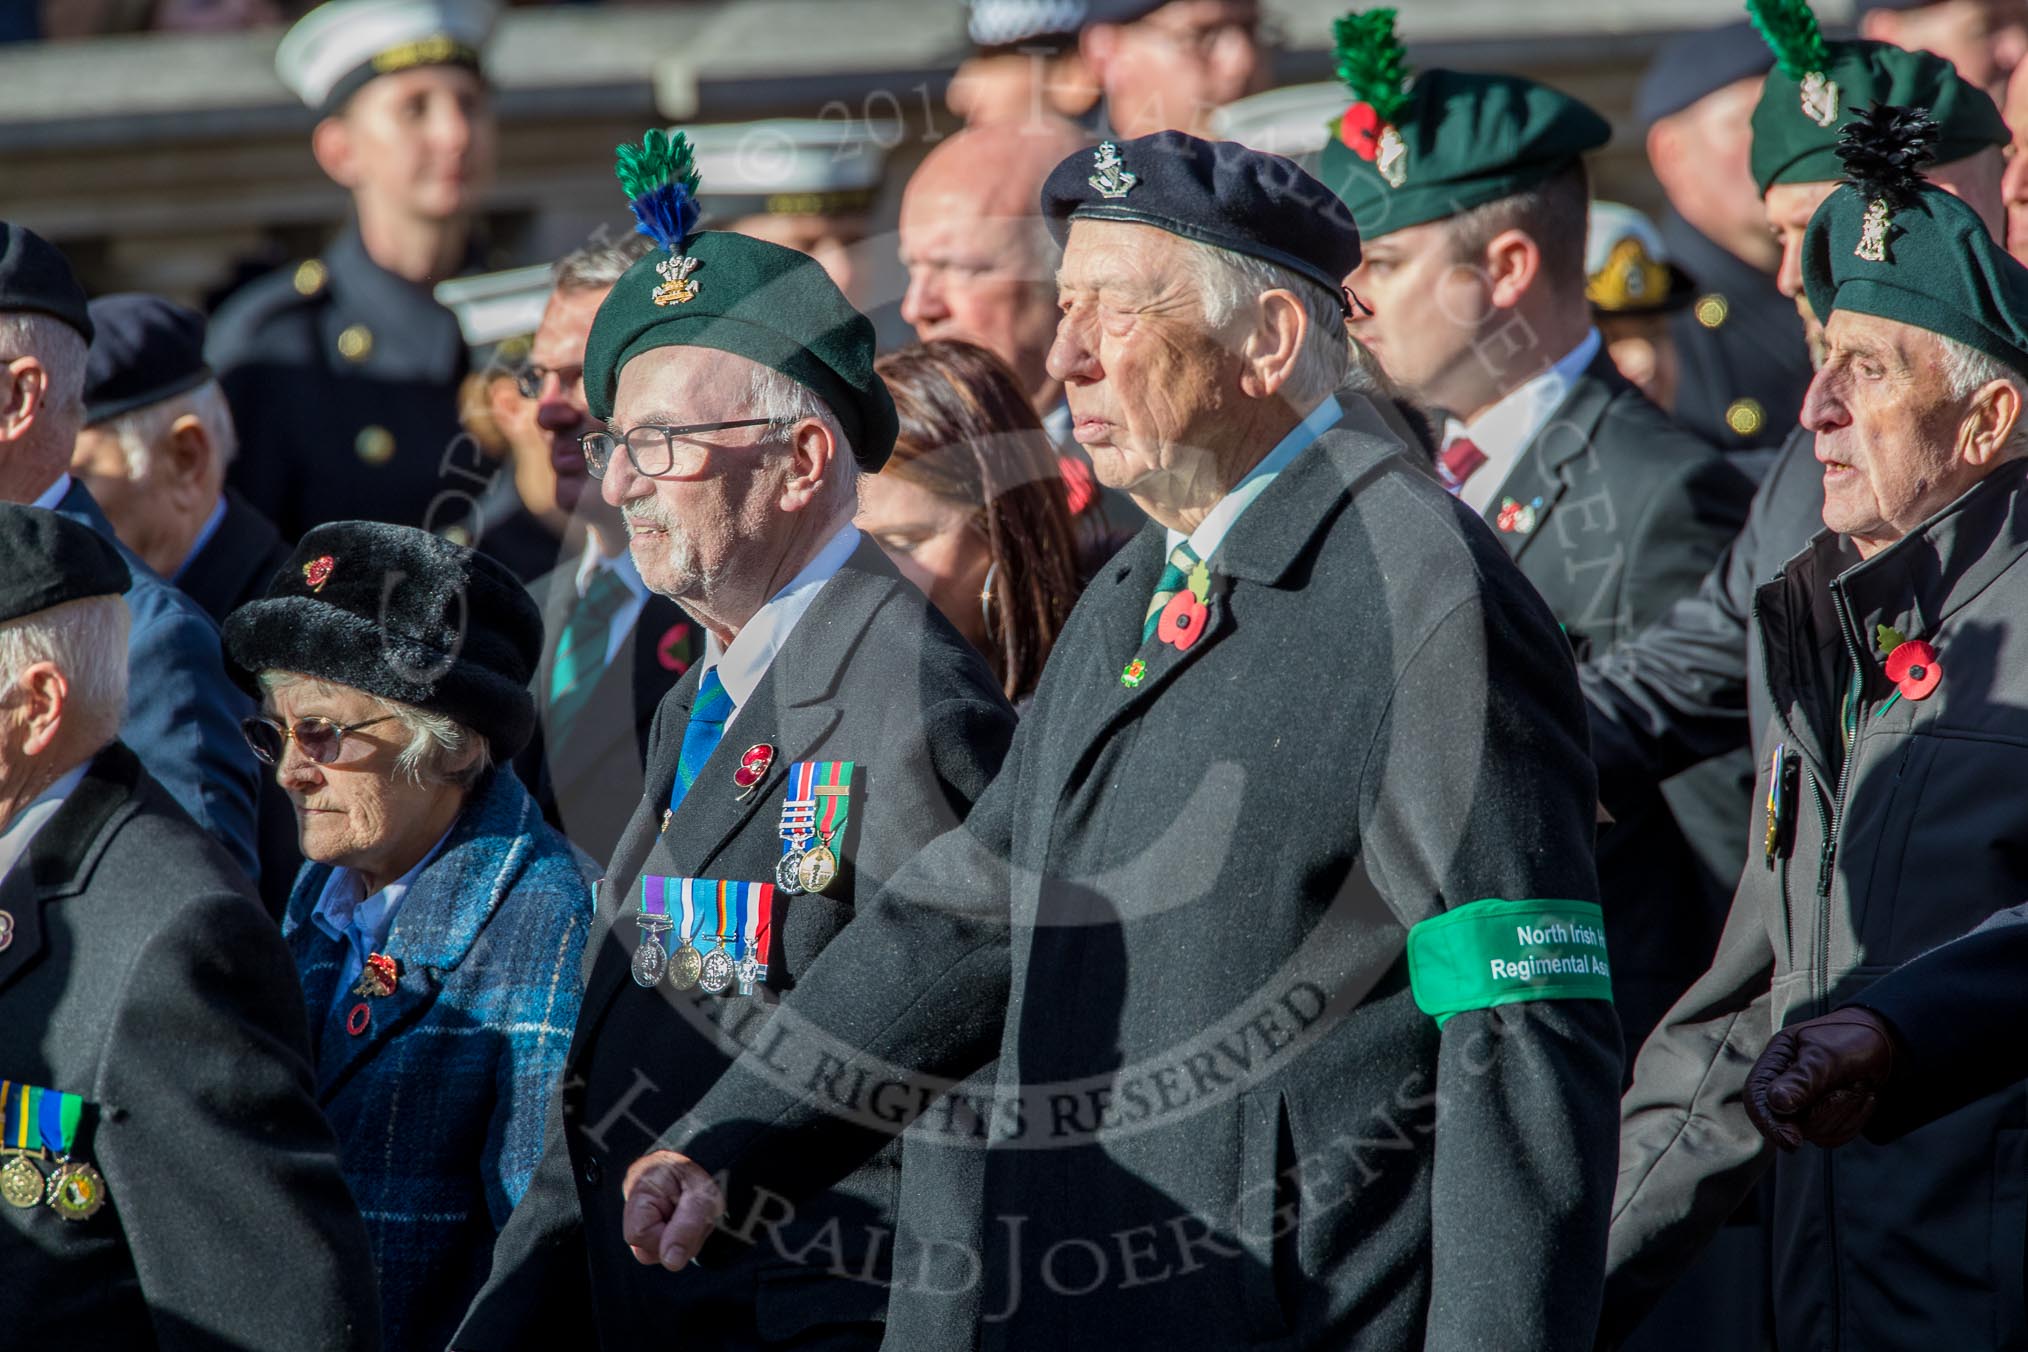 Combined Irish Regiments Association (Group A36, 34 members) during the Royal British Legion March Past on Remembrance Sunday at the Cenotaph, Whitehall, Westminster, London, 11 November 2018, 12:02.